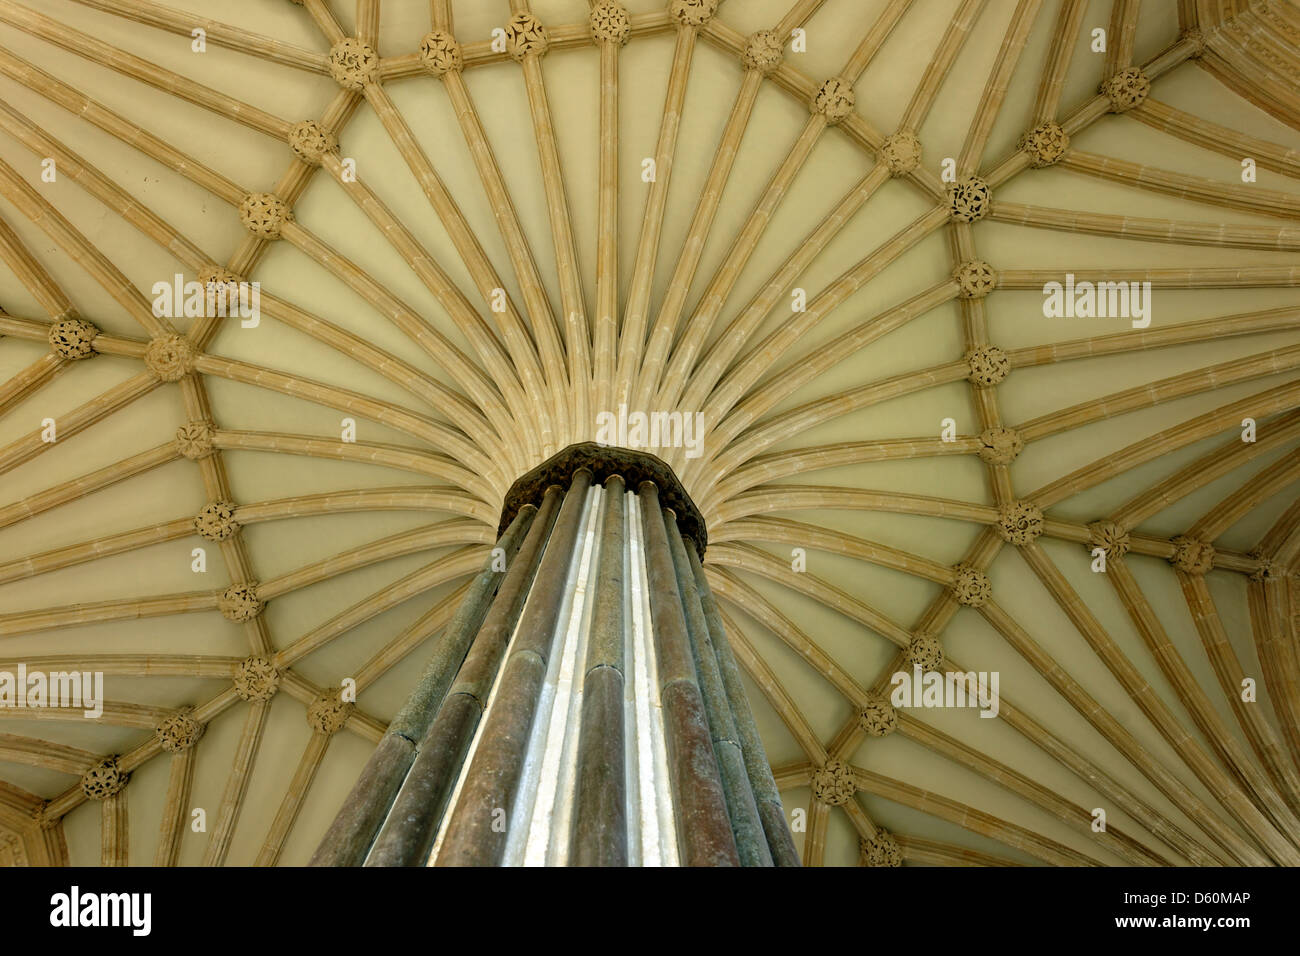 Vaulted ceiling in the Chapter House, Wells Cathedral, Somerset, England Stock Photo